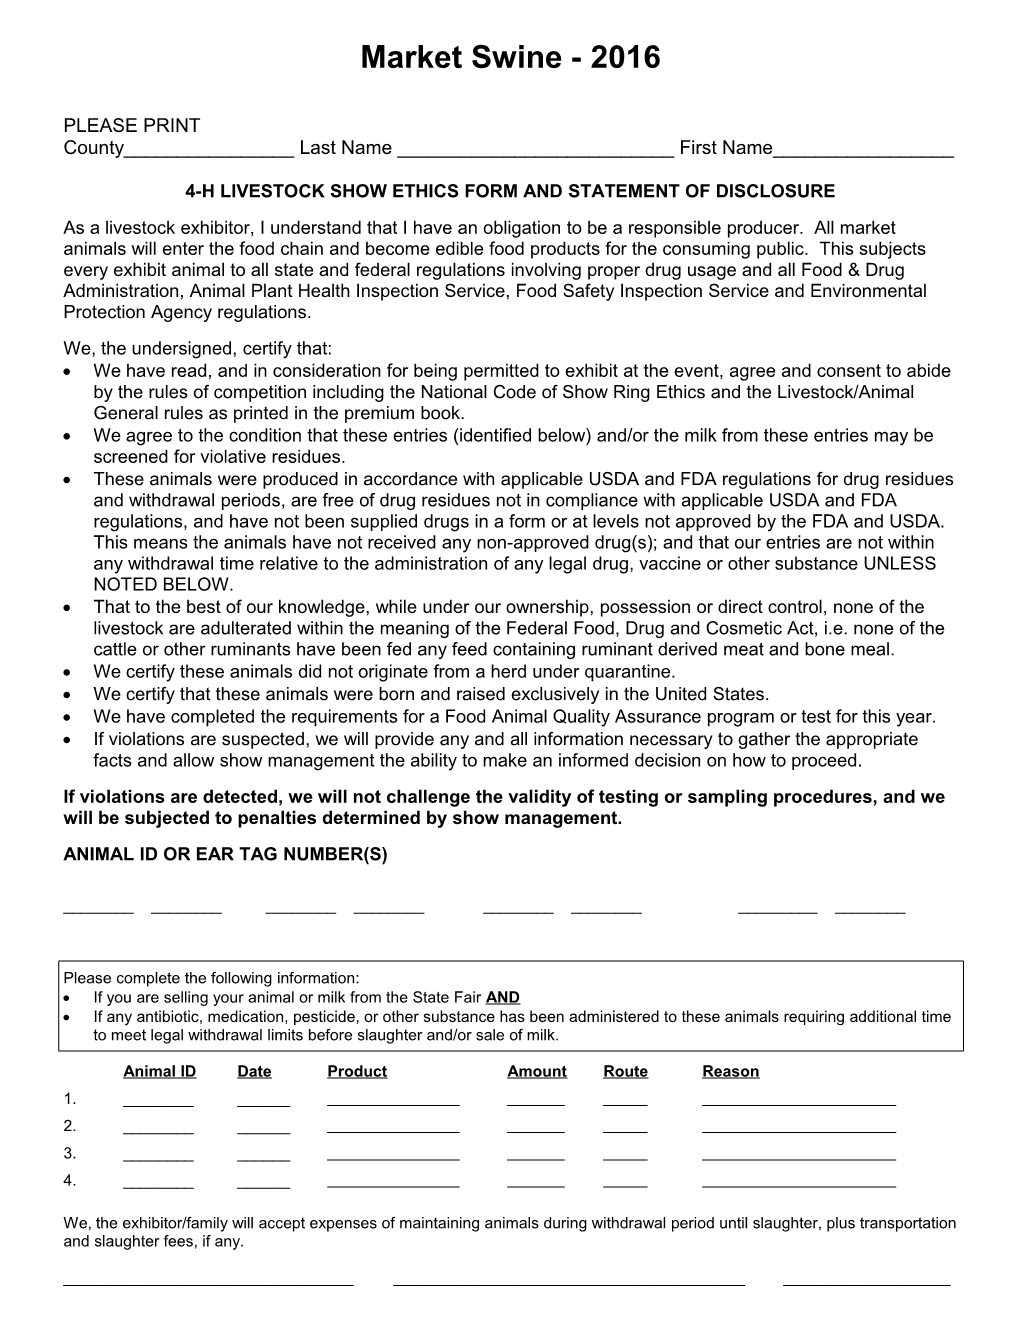 4-H Livestock Show Ethics Form and Statement of Disclosure